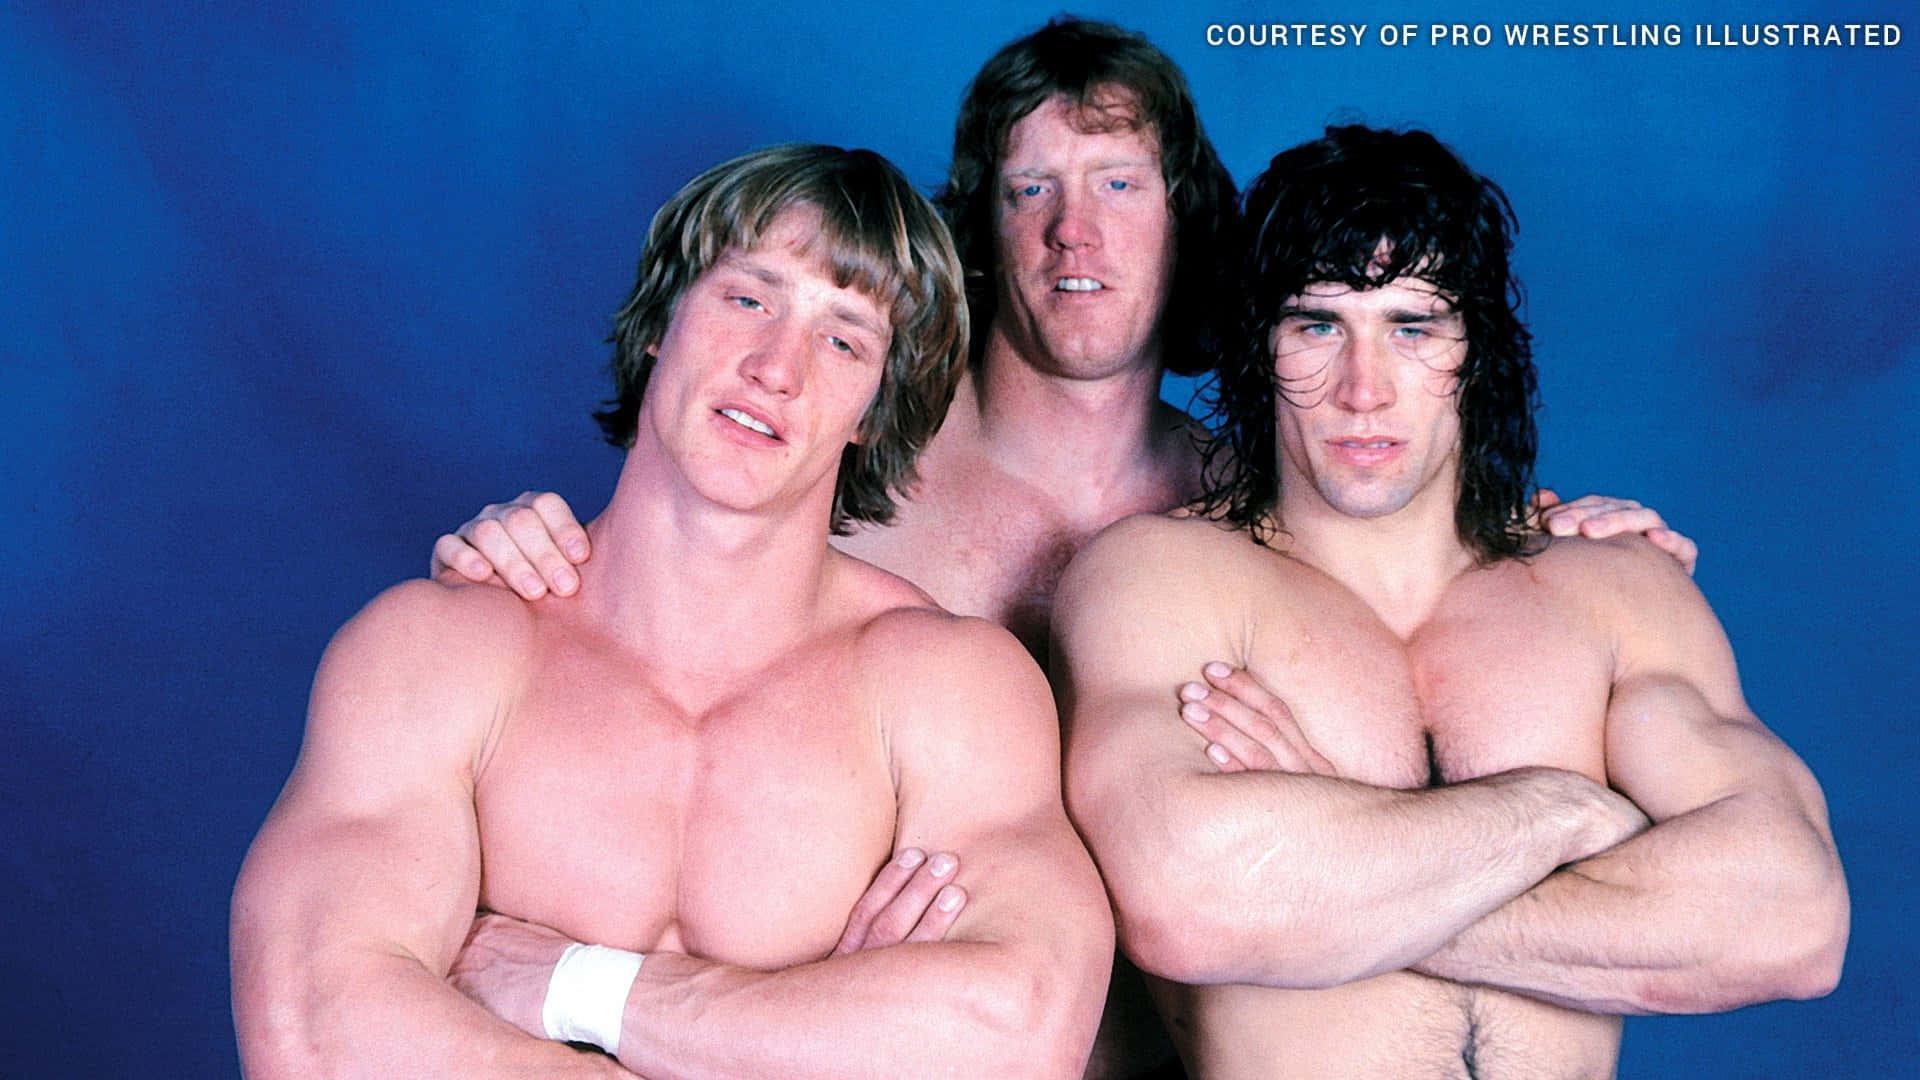 American Pro Wrestler David Von Erich With Kerry And Kevin Wallpaper